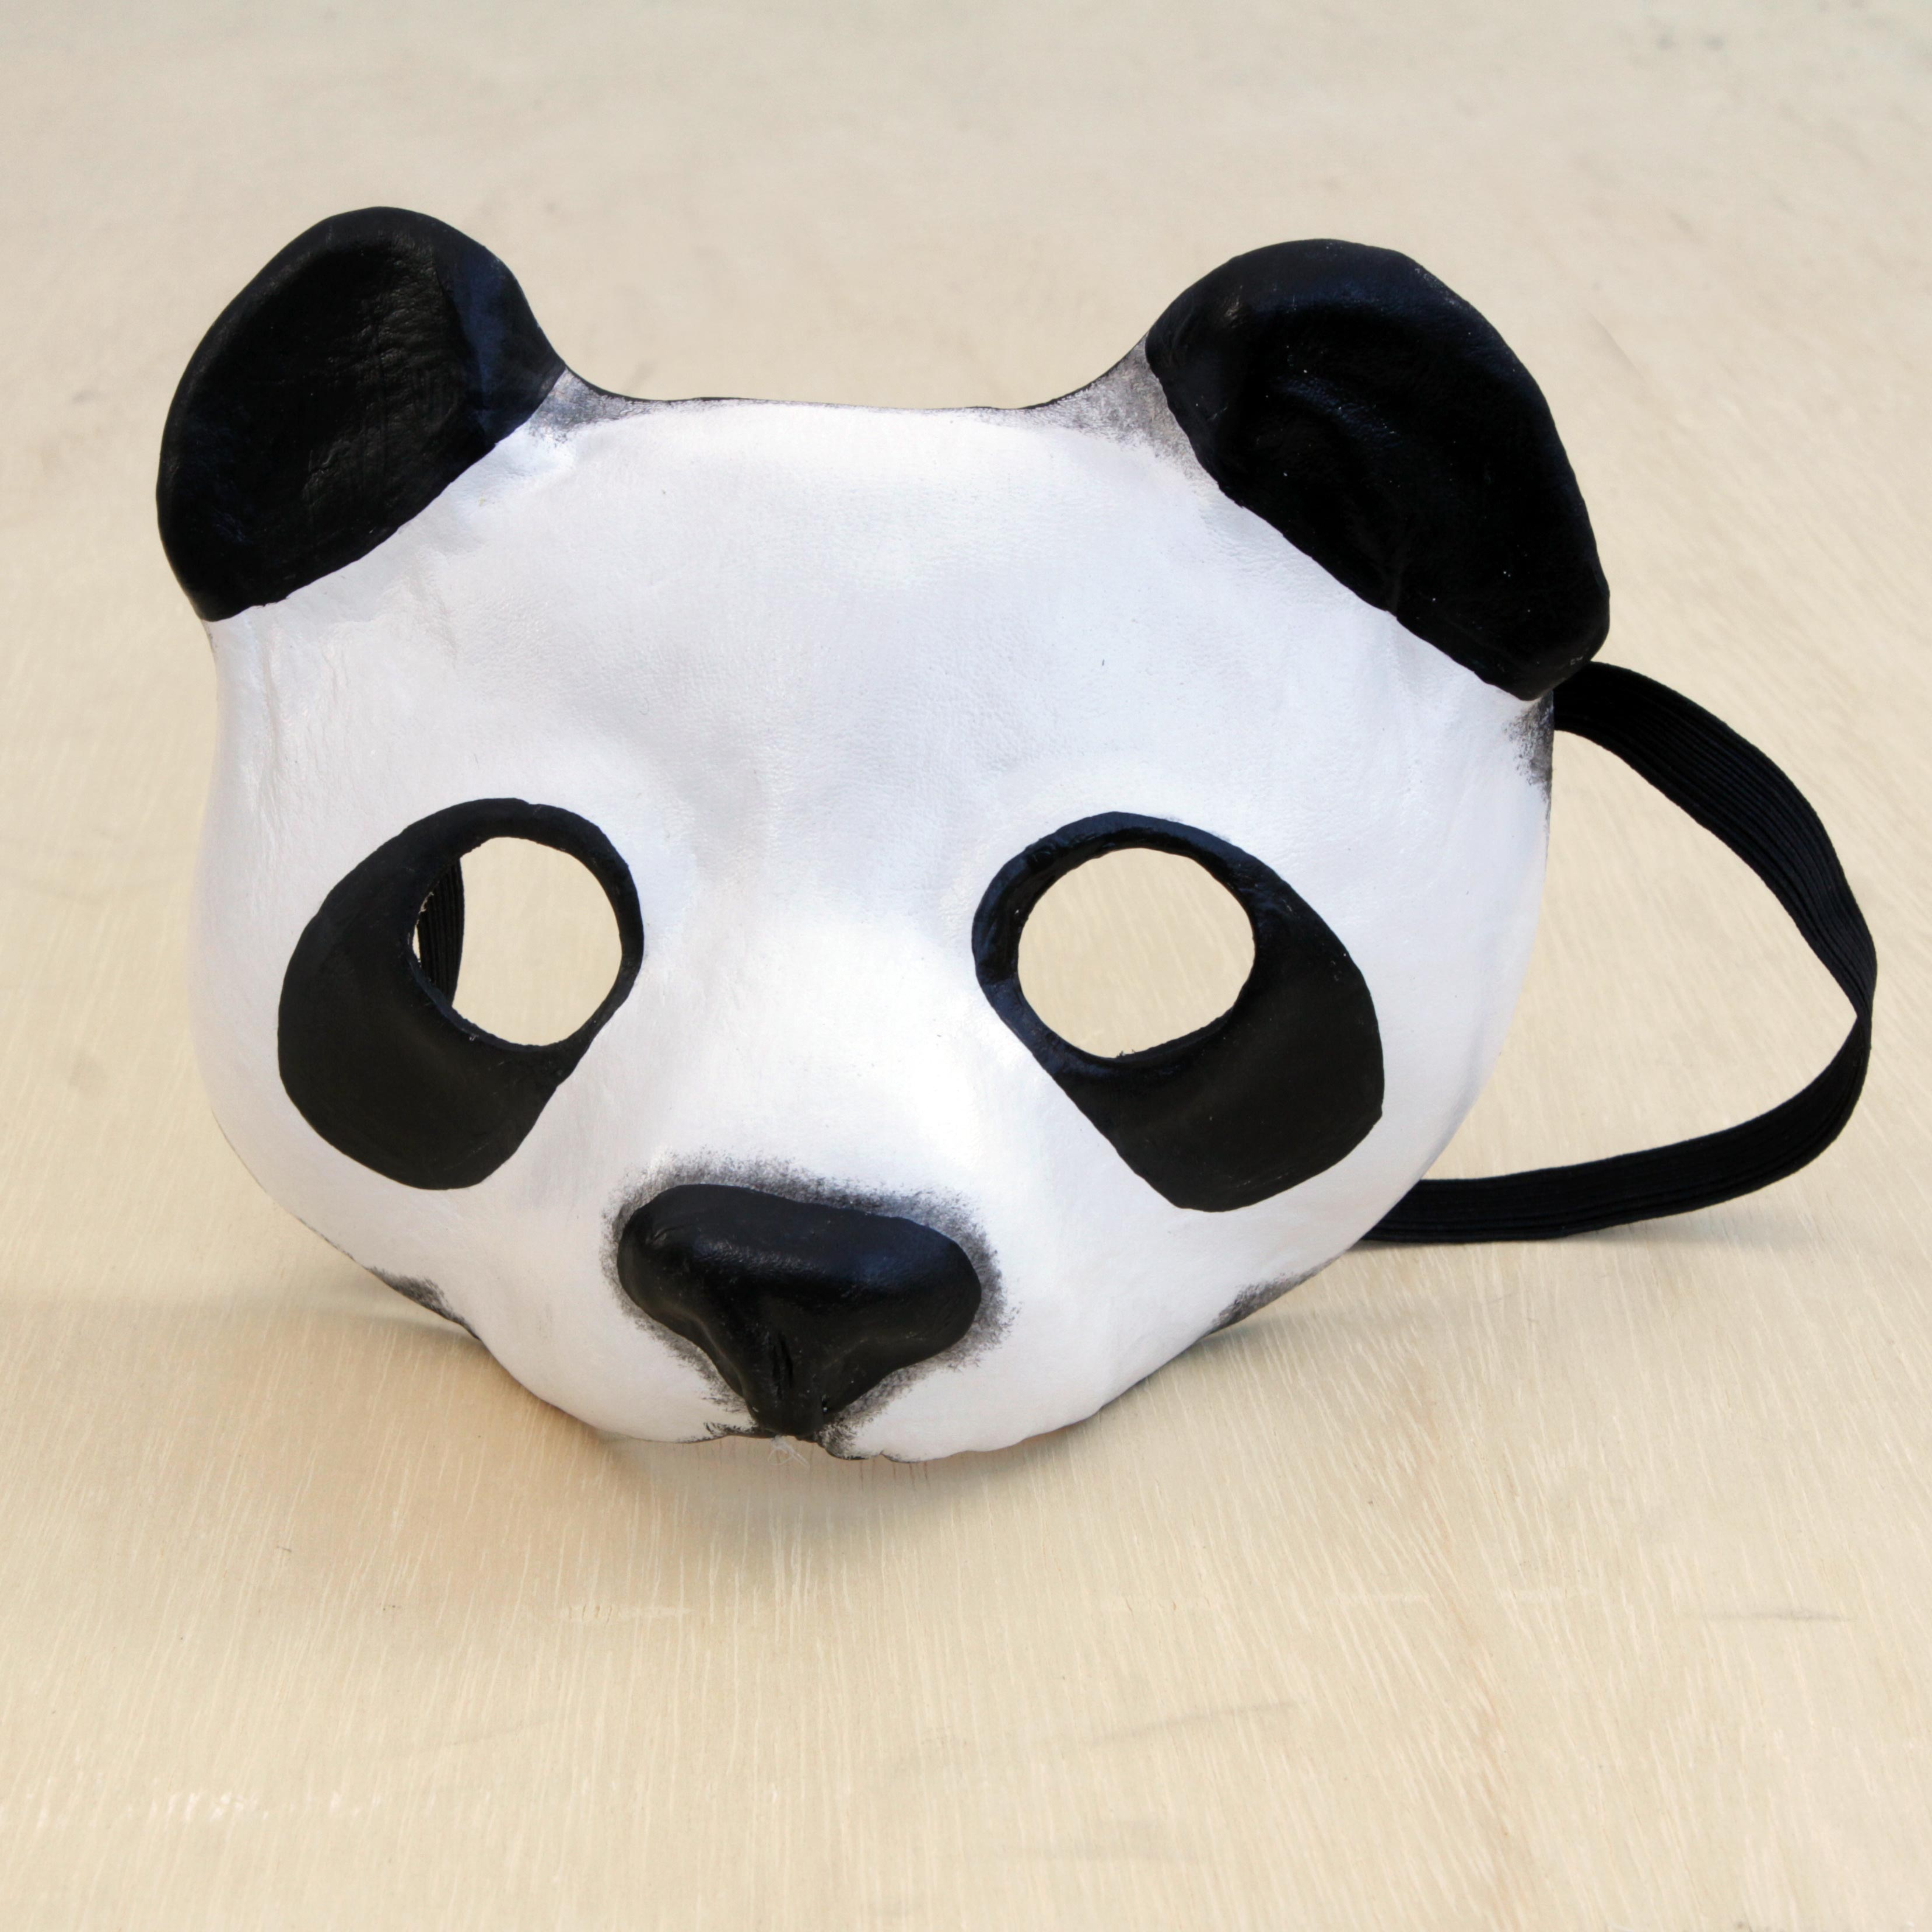 Handcrafted Leather Panda Mask from Brazil Panda Face |